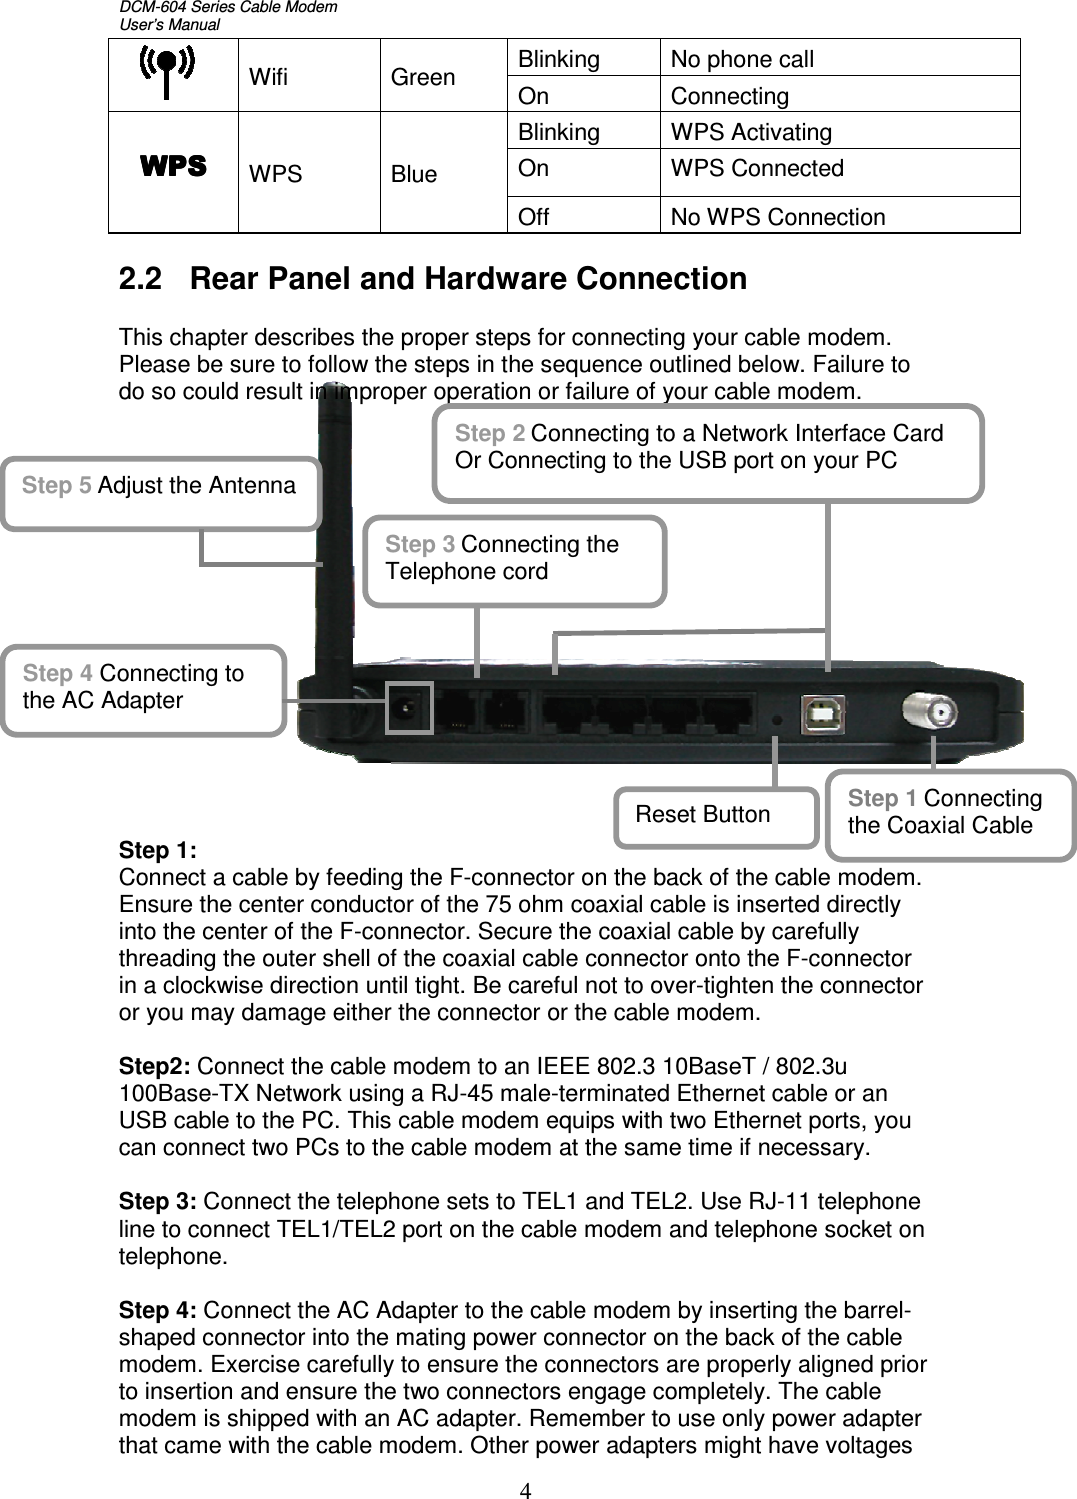 DCM-604 Series Cable Modem  User’s Manual 4   Wifi  Green  Blinking  No phone call On   Connecting    WPSWPSWPSWPS     WPS  Blue Blinking  WPS Activating    On  WPS Connected         Off  No WPS Connection     2.2  Rear Panel and Hardware Connection  This chapter describes the proper steps for connecting your cable modem. Please be sure to follow the steps in the sequence outlined below. Failure to do so could result in improper operation or failure of your cable modem.                 Step 1: Connect a cable by feeding the F-connector on the back of the cable modem. Ensure the center conductor of the 75 ohm coaxial cable is inserted directly into the center of the F-connector. Secure the coaxial cable by carefully threading the outer shell of the coaxial cable connector onto the F-connector in a clockwise direction until tight. Be careful not to over-tighten the connector or you may damage either the connector or the cable modem.  Step2: Connect the cable modem to an IEEE 802.3 10BaseT / 802.3u 100Base-TX Network using a RJ-45 male-terminated Ethernet cable or an USB cable to the PC. This cable modem equips with two Ethernet ports, you can connect two PCs to the cable modem at the same time if necessary.  Step 3: Connect the telephone sets to TEL1 and TEL2. Use RJ-11 telephone line to connect TEL1/TEL2 port on the cable modem and telephone socket on telephone.  Step 4: Connect the AC Adapter to the cable modem by inserting the barrel-shaped connector into the mating power connector on the back of the cable modem. Exercise carefully to ensure the connectors are properly aligned prior to insertion and ensure the two connectors engage completely. The cable modem is shipped with an AC adapter. Remember to use only power adapter that came with the cable modem. Other power adapters might have voltages Step 1 Connecting the Coaxial Cable Step 3 Connecting the Telephone cord Step 5 Adjust the Antenna Step 4 Connecting to the AC Adapter Step 2 Connecting to a Network Interface Card Or Connecting to the USB port on your PC Reset Button 